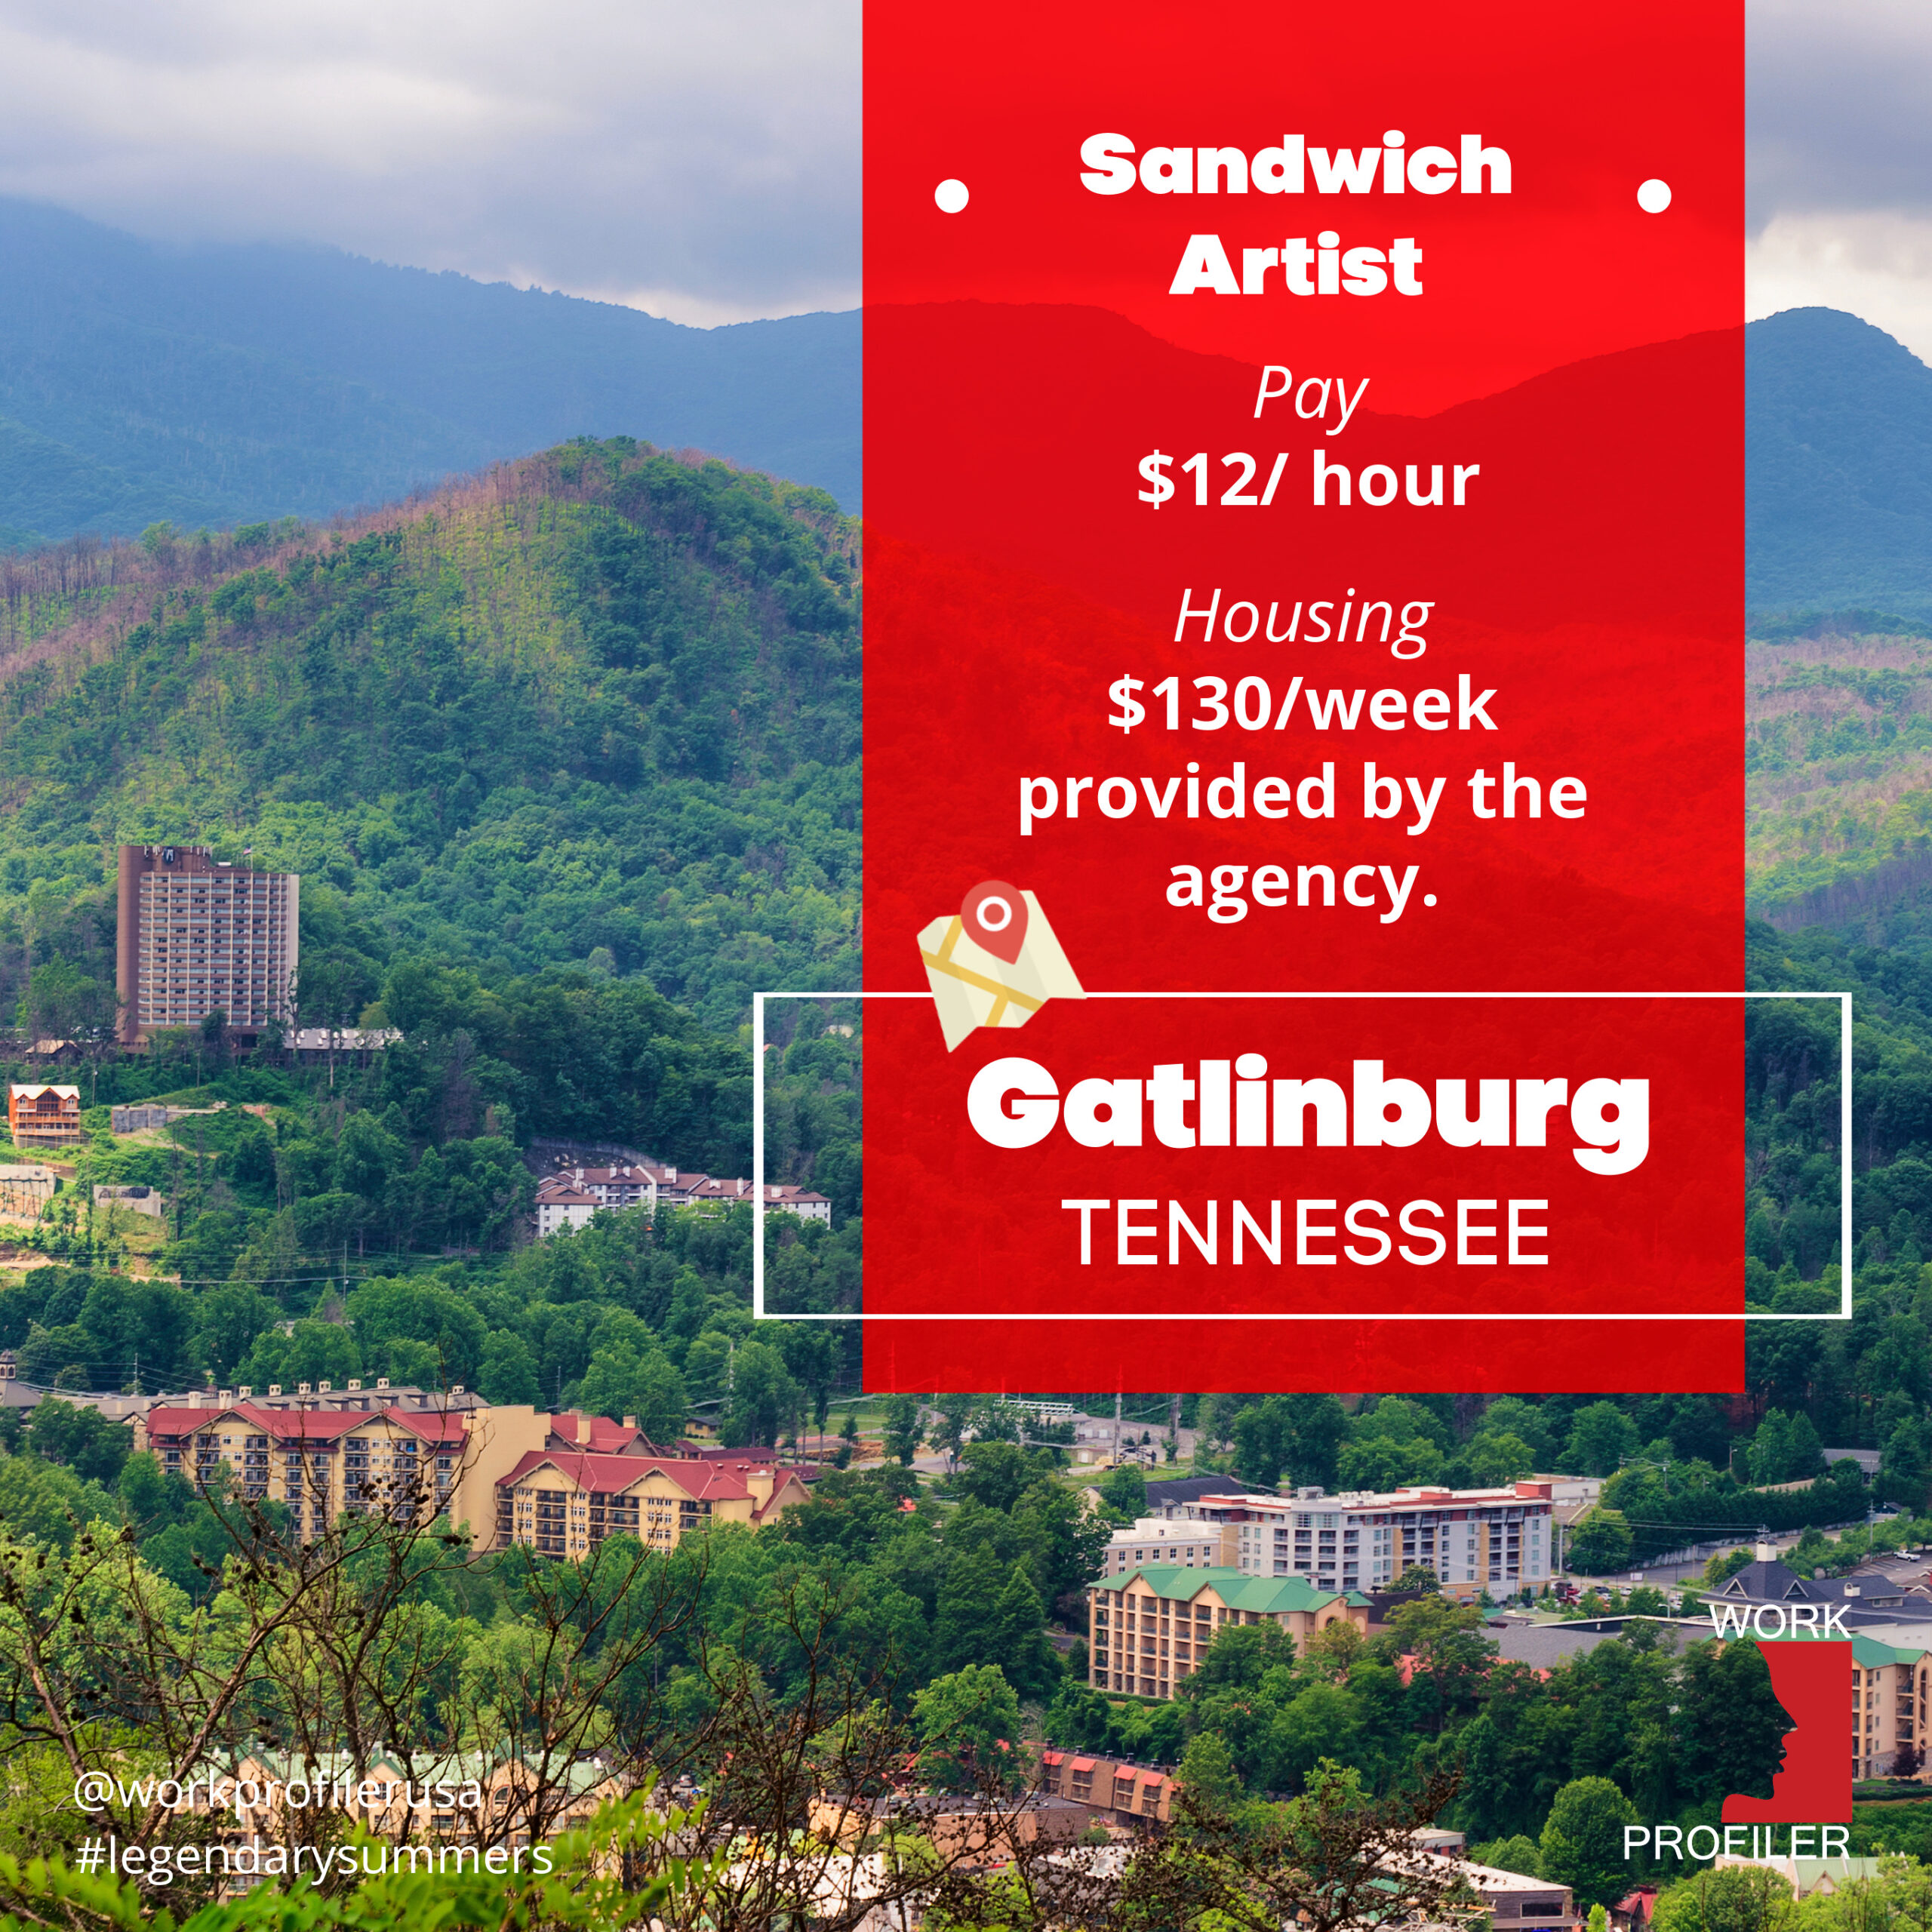 A job advertisement for a restaurant crew member position in Gatlinburg, Tennessee.